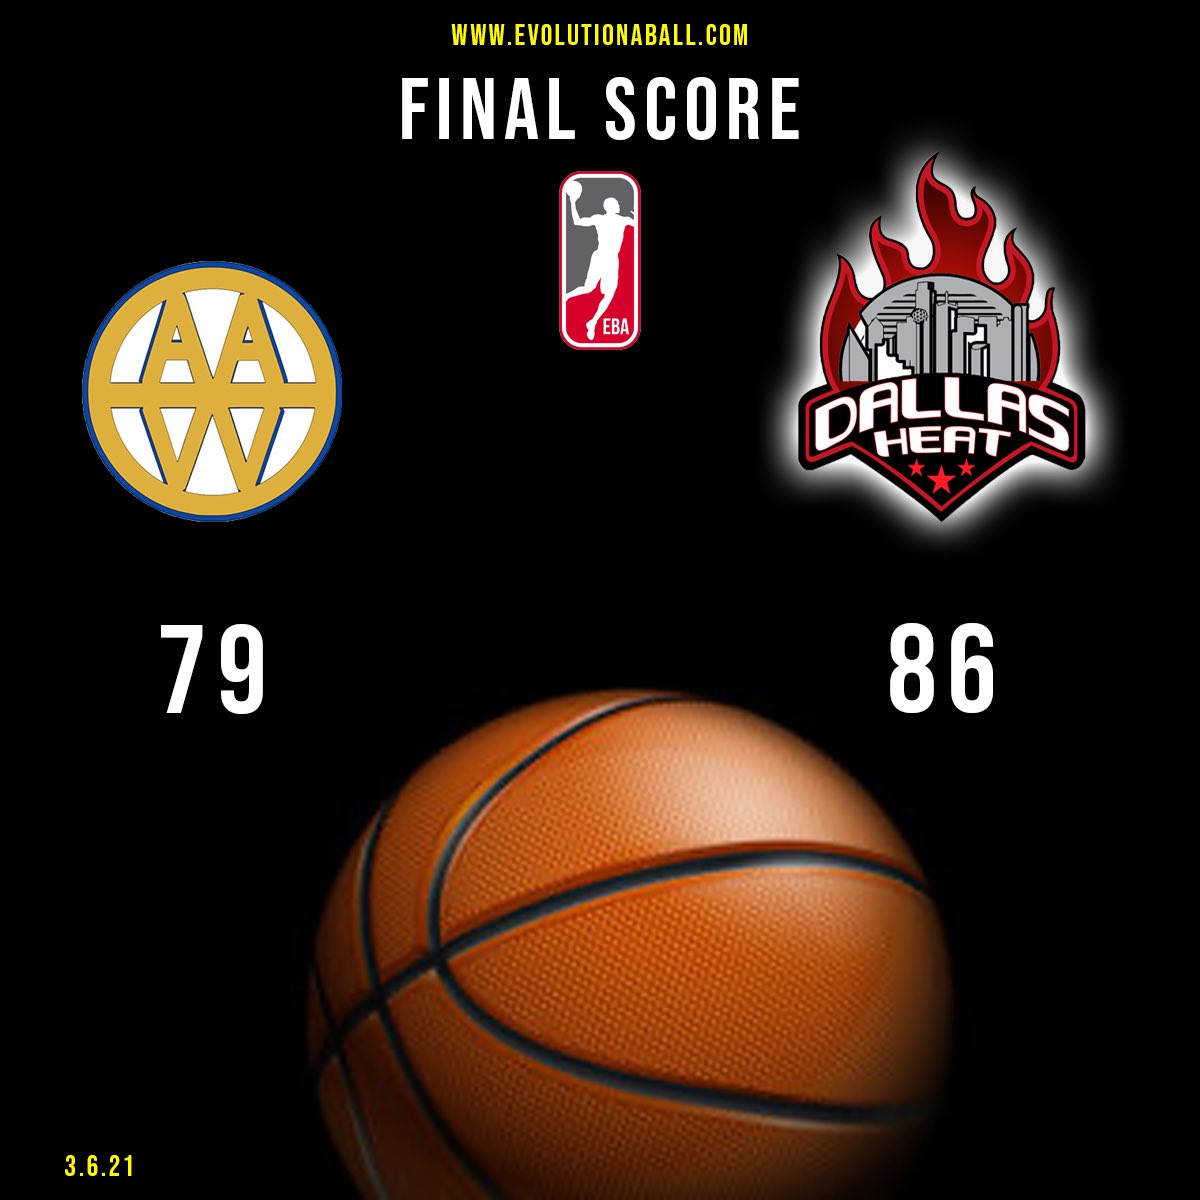 Great matchups took place tonight! with some clutch Elam Endings !
Full stats coming in the AM❗️
#evoyourgame
#evoaball #eba #explorepage #preseason #history #nbagleague #fiba #eurobasket #ebatv #dallas #packup #dfw #dalheatup #wolfpack #aaw #txdefenders